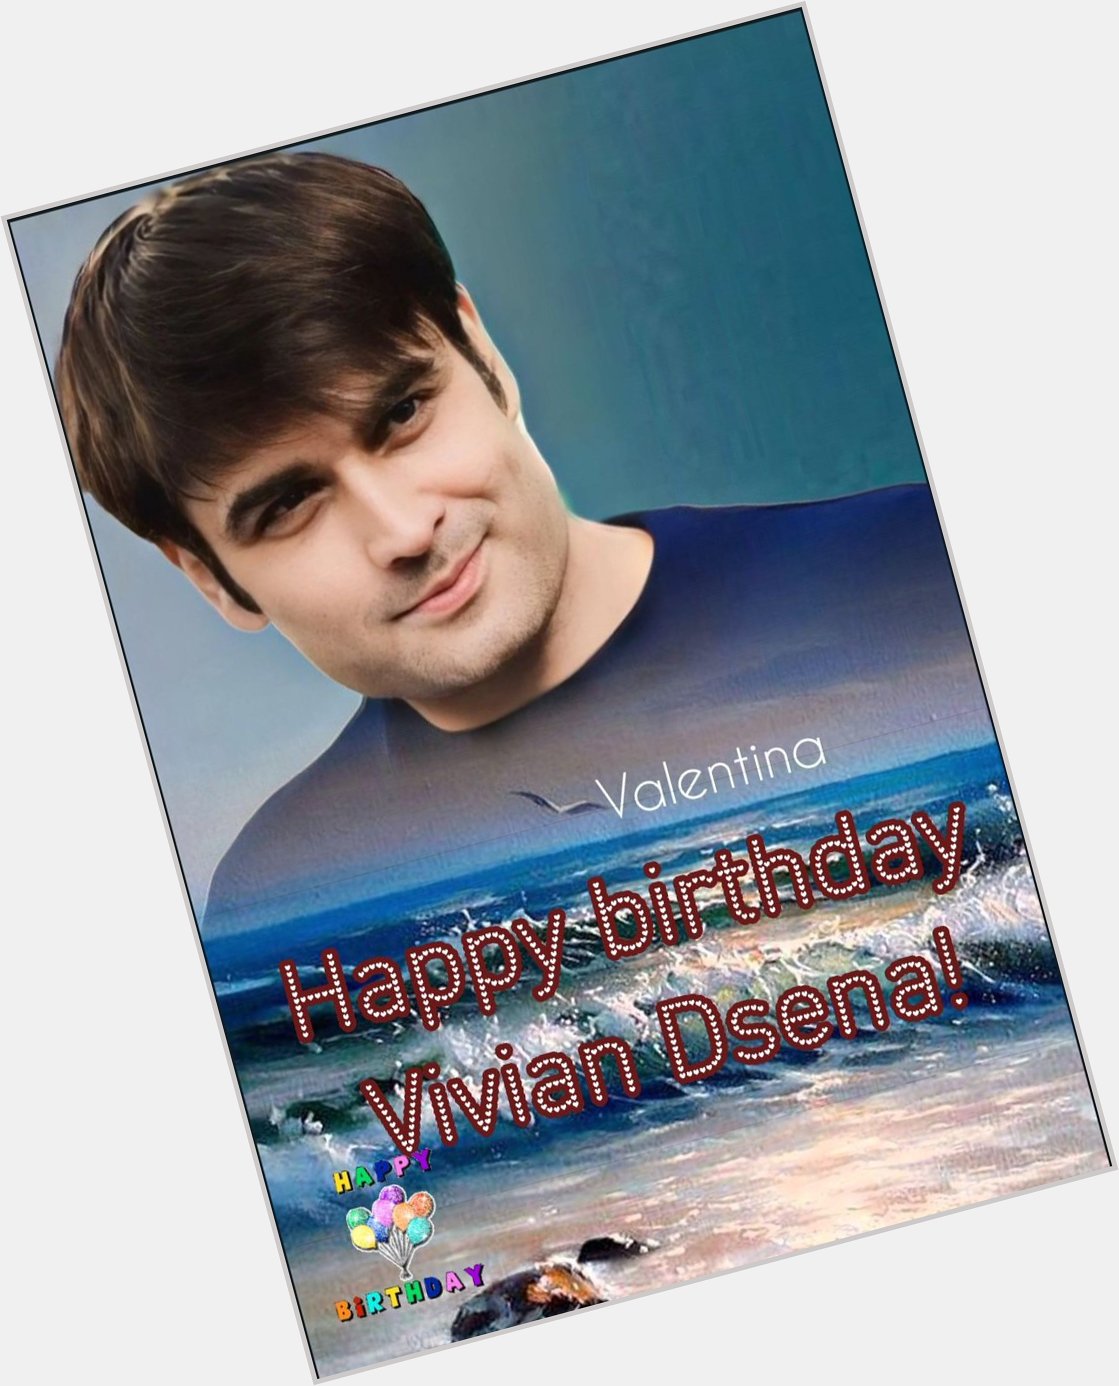 Happy birthday to you Vivian Dsena!, health to you and delight us fans with your talent
628WISHES FOR VIVIAN 